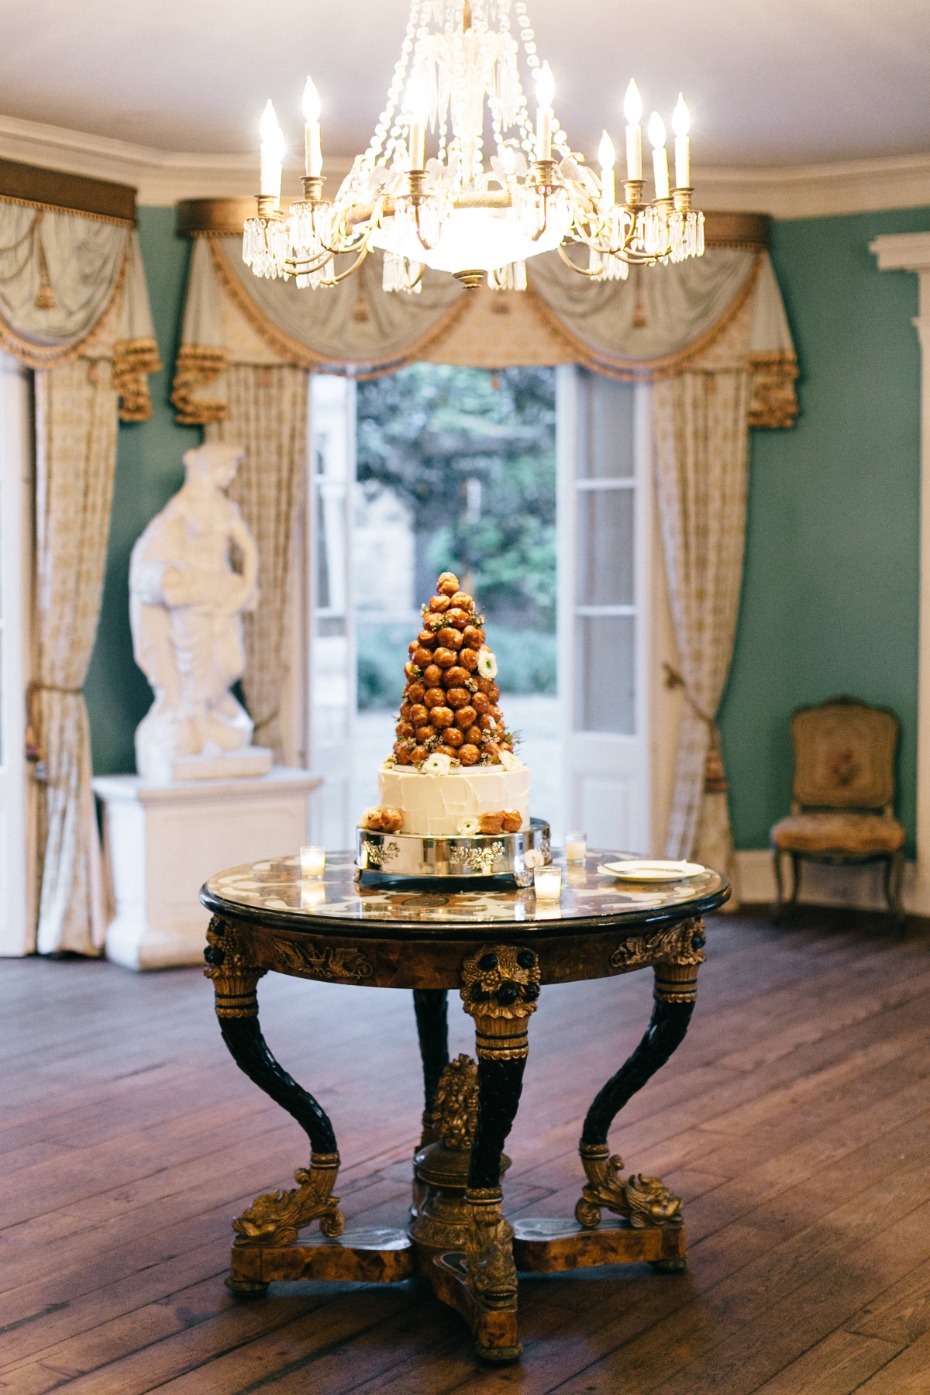 French-inspired croquembouche cake